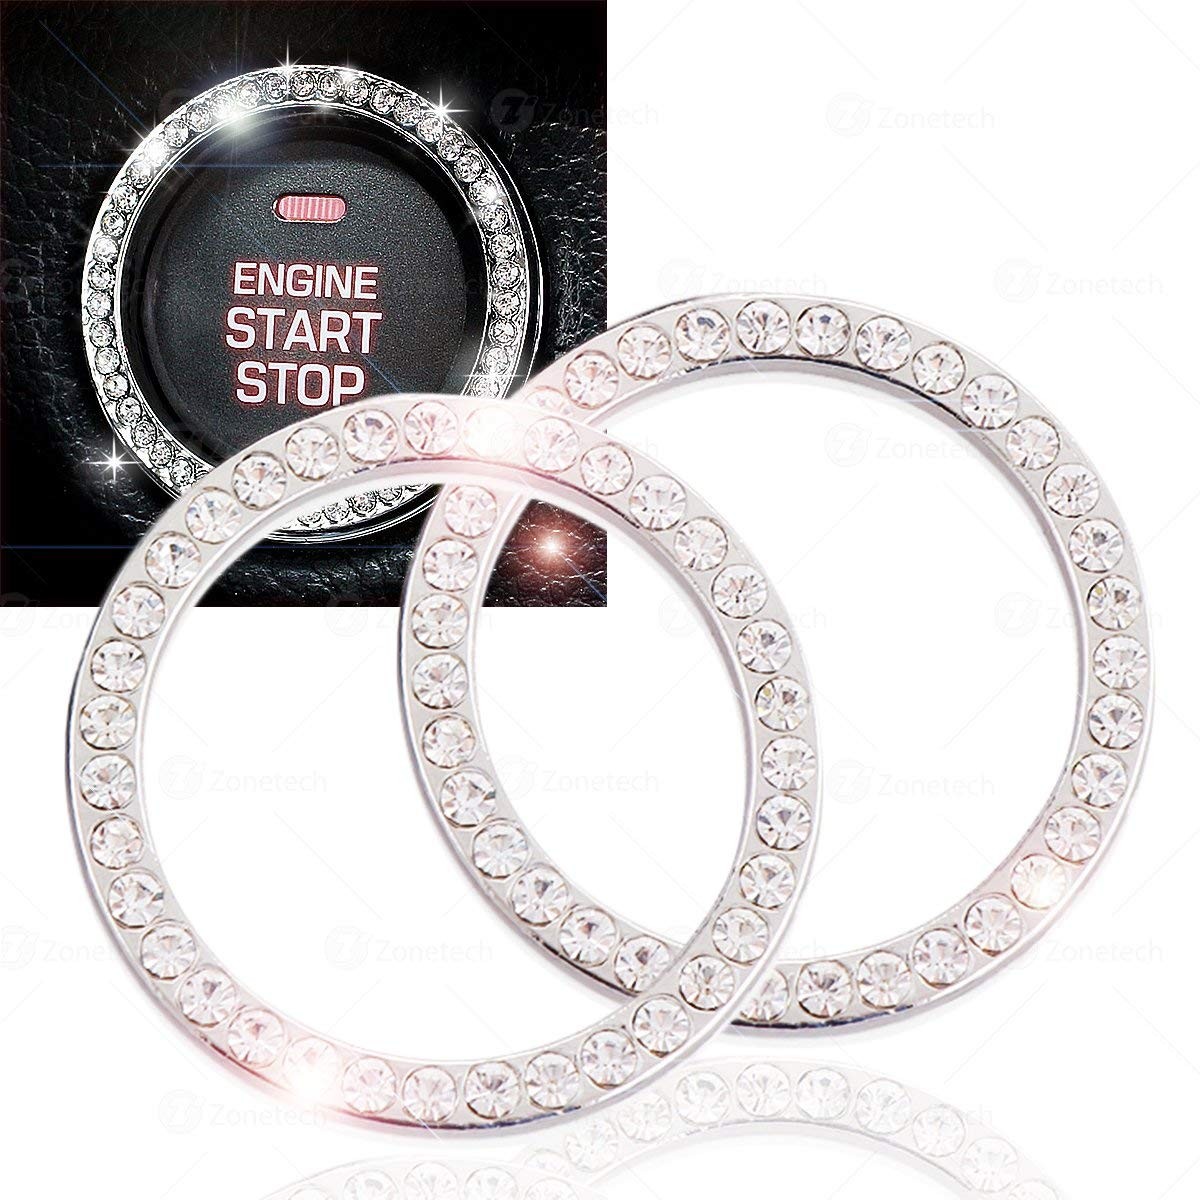 Crystal Rhinestone Car Engine Start Key Ring Stop Ignition Button Sticky Ring Decor Ring TiooDre Button Ring White 